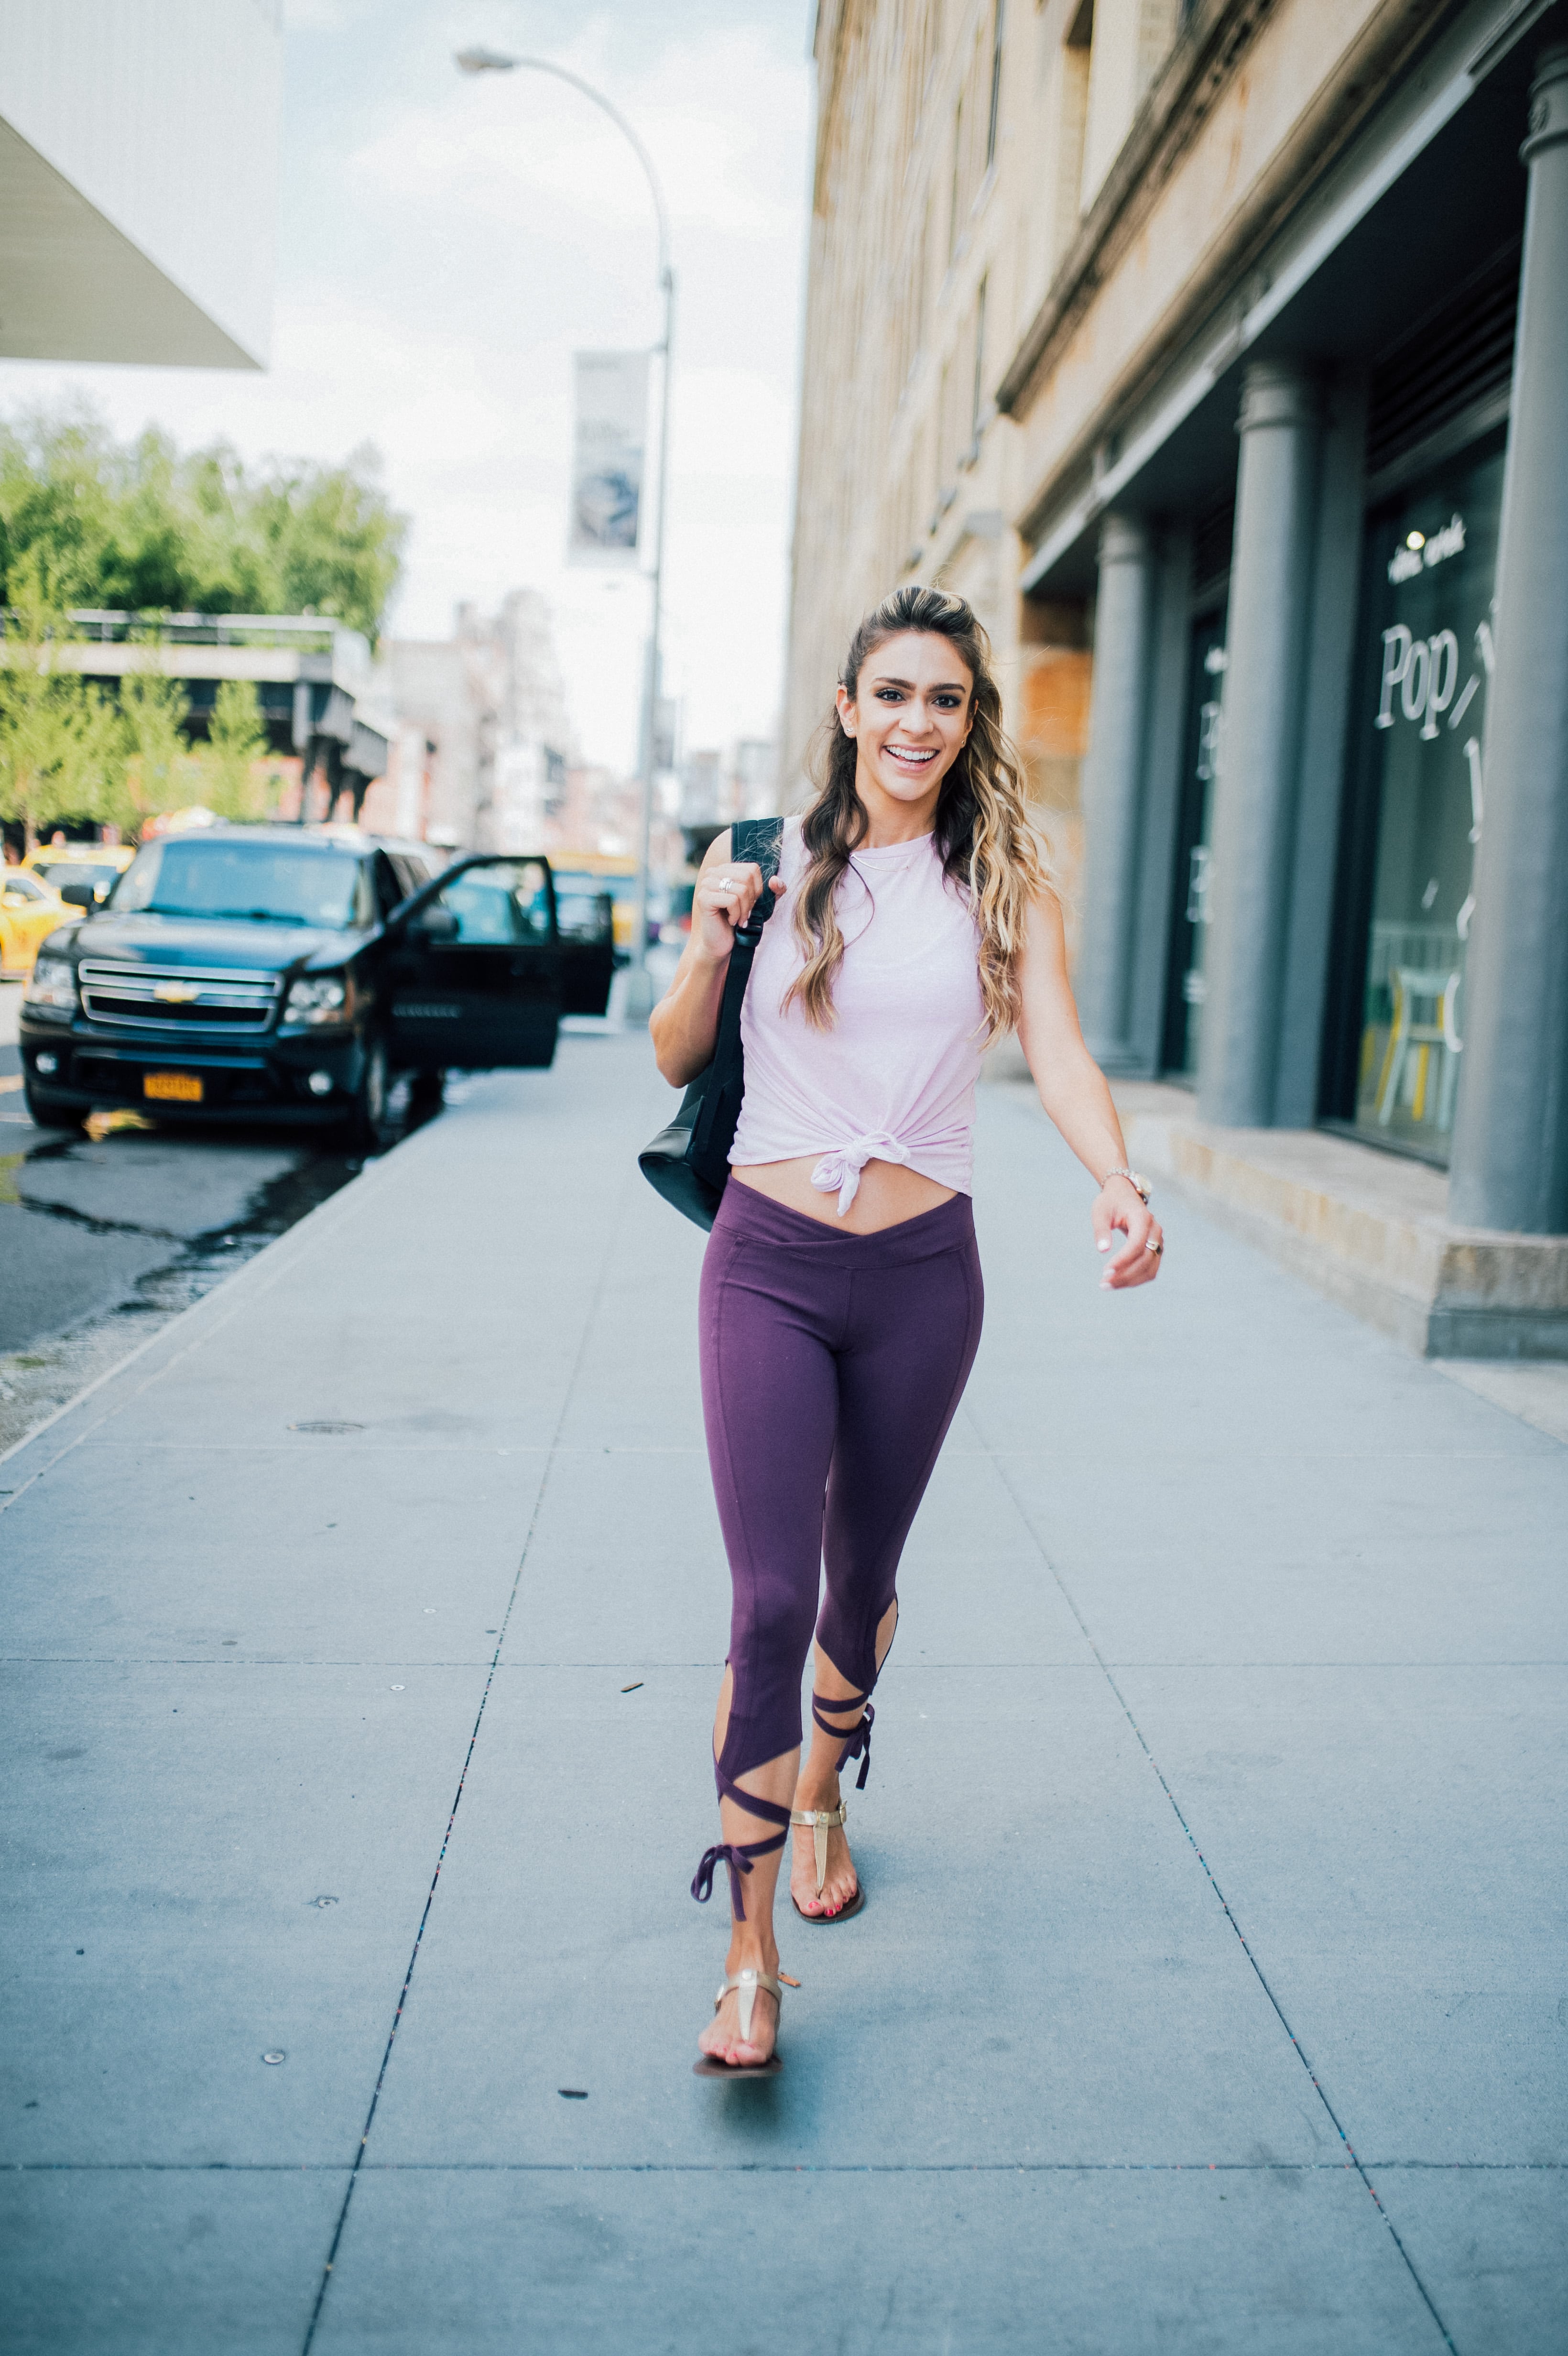 Free People fpMovement The Strong Movement Strong Girl Ailis Garcia Target Activewear Collab New York Yoga Outlet fit fashion blogger 25